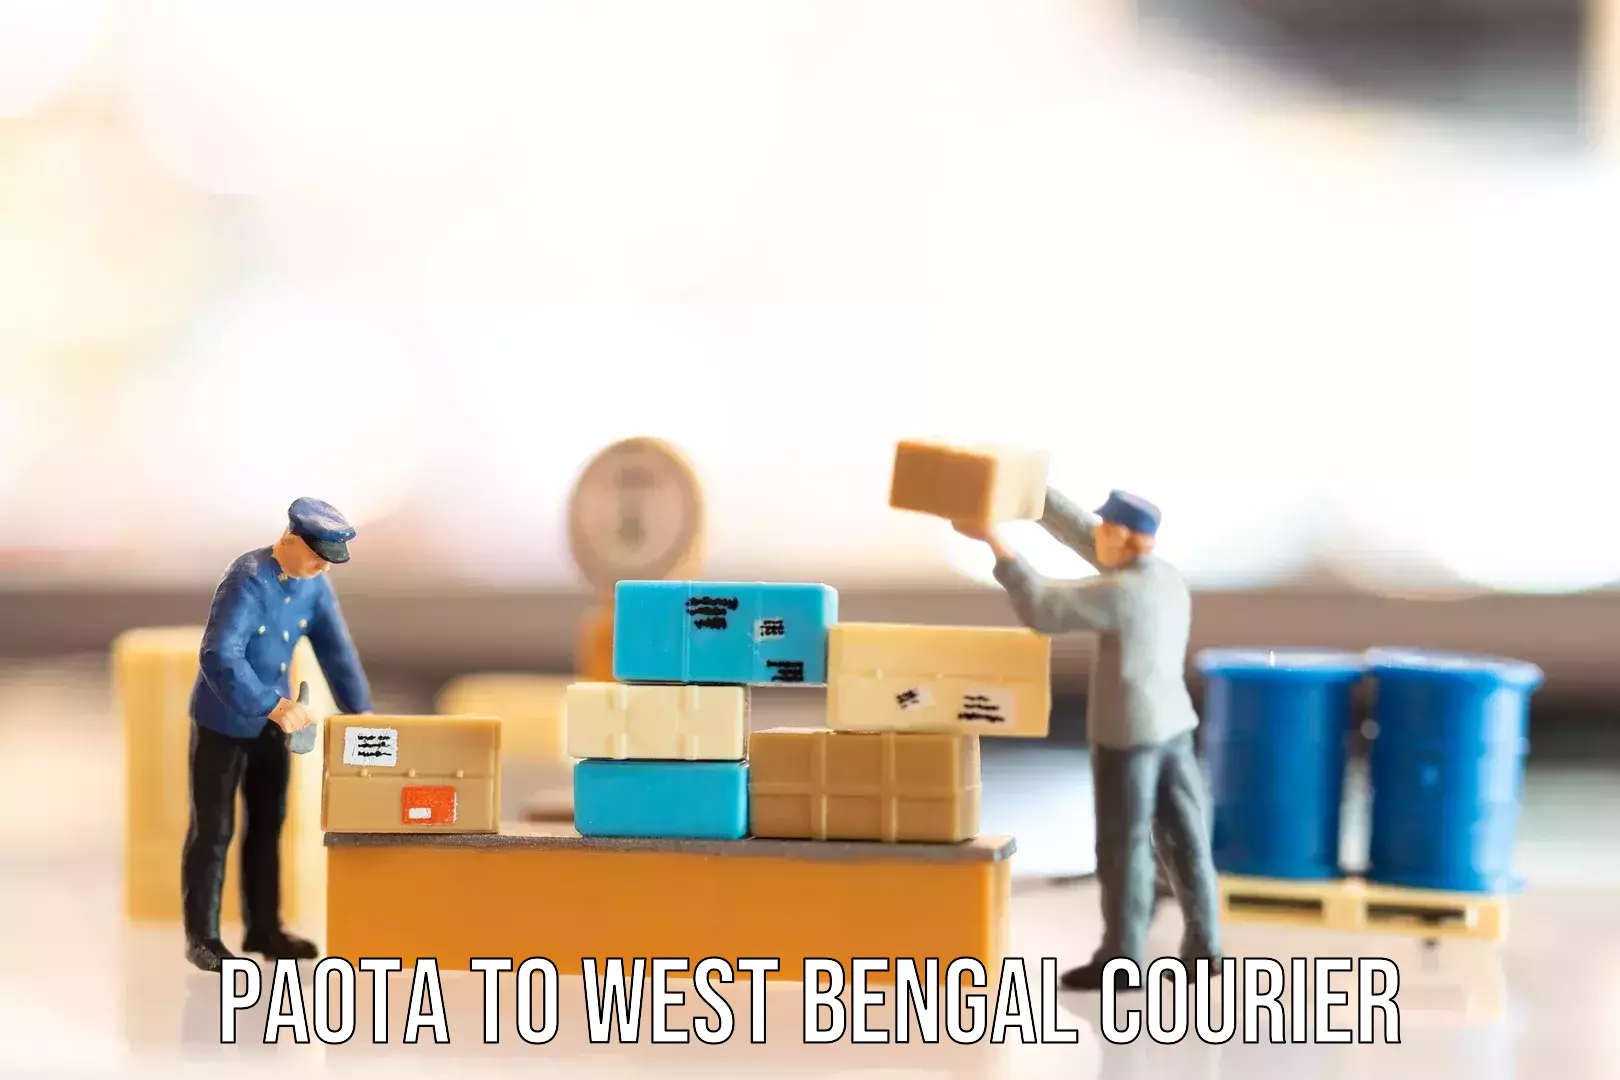 Baggage transport scheduler Paota to West Bengal